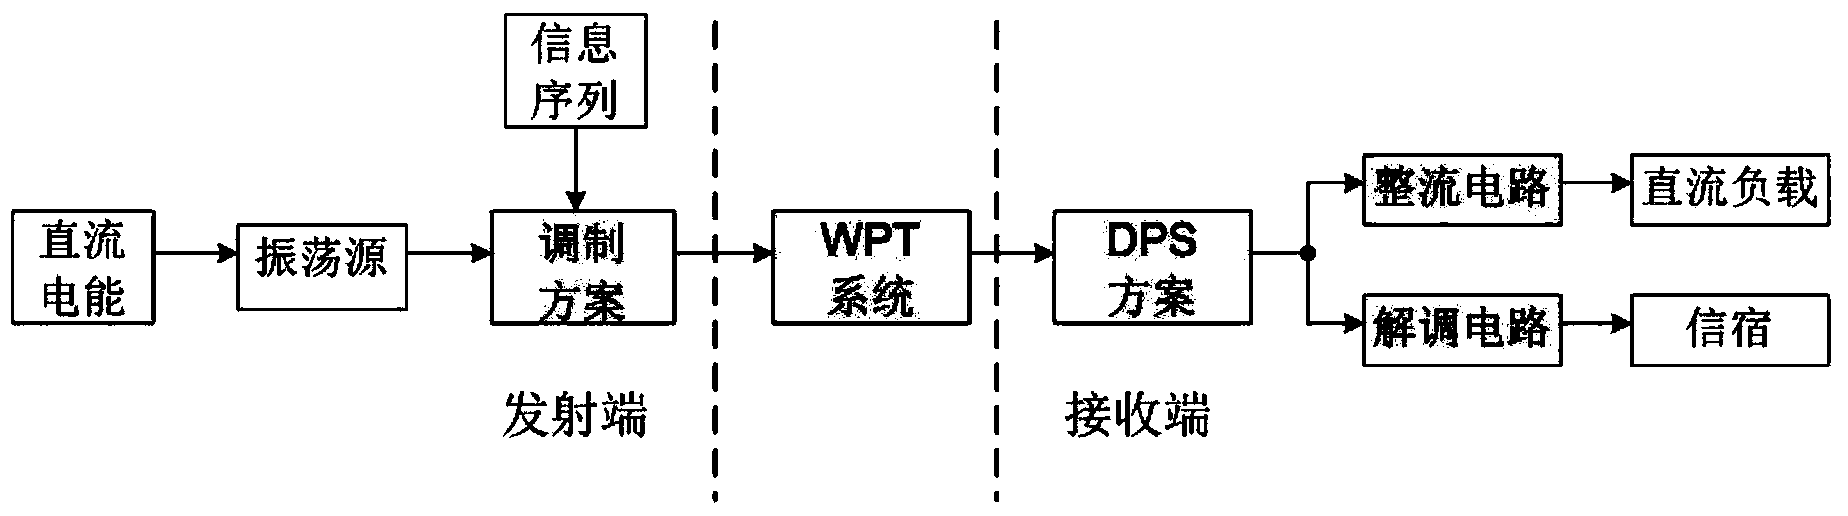 Frequency domain power distributor for AMPSK (Asymmetric M-ary Phase Shift Keying) simultaneous wireless information and power transfer system